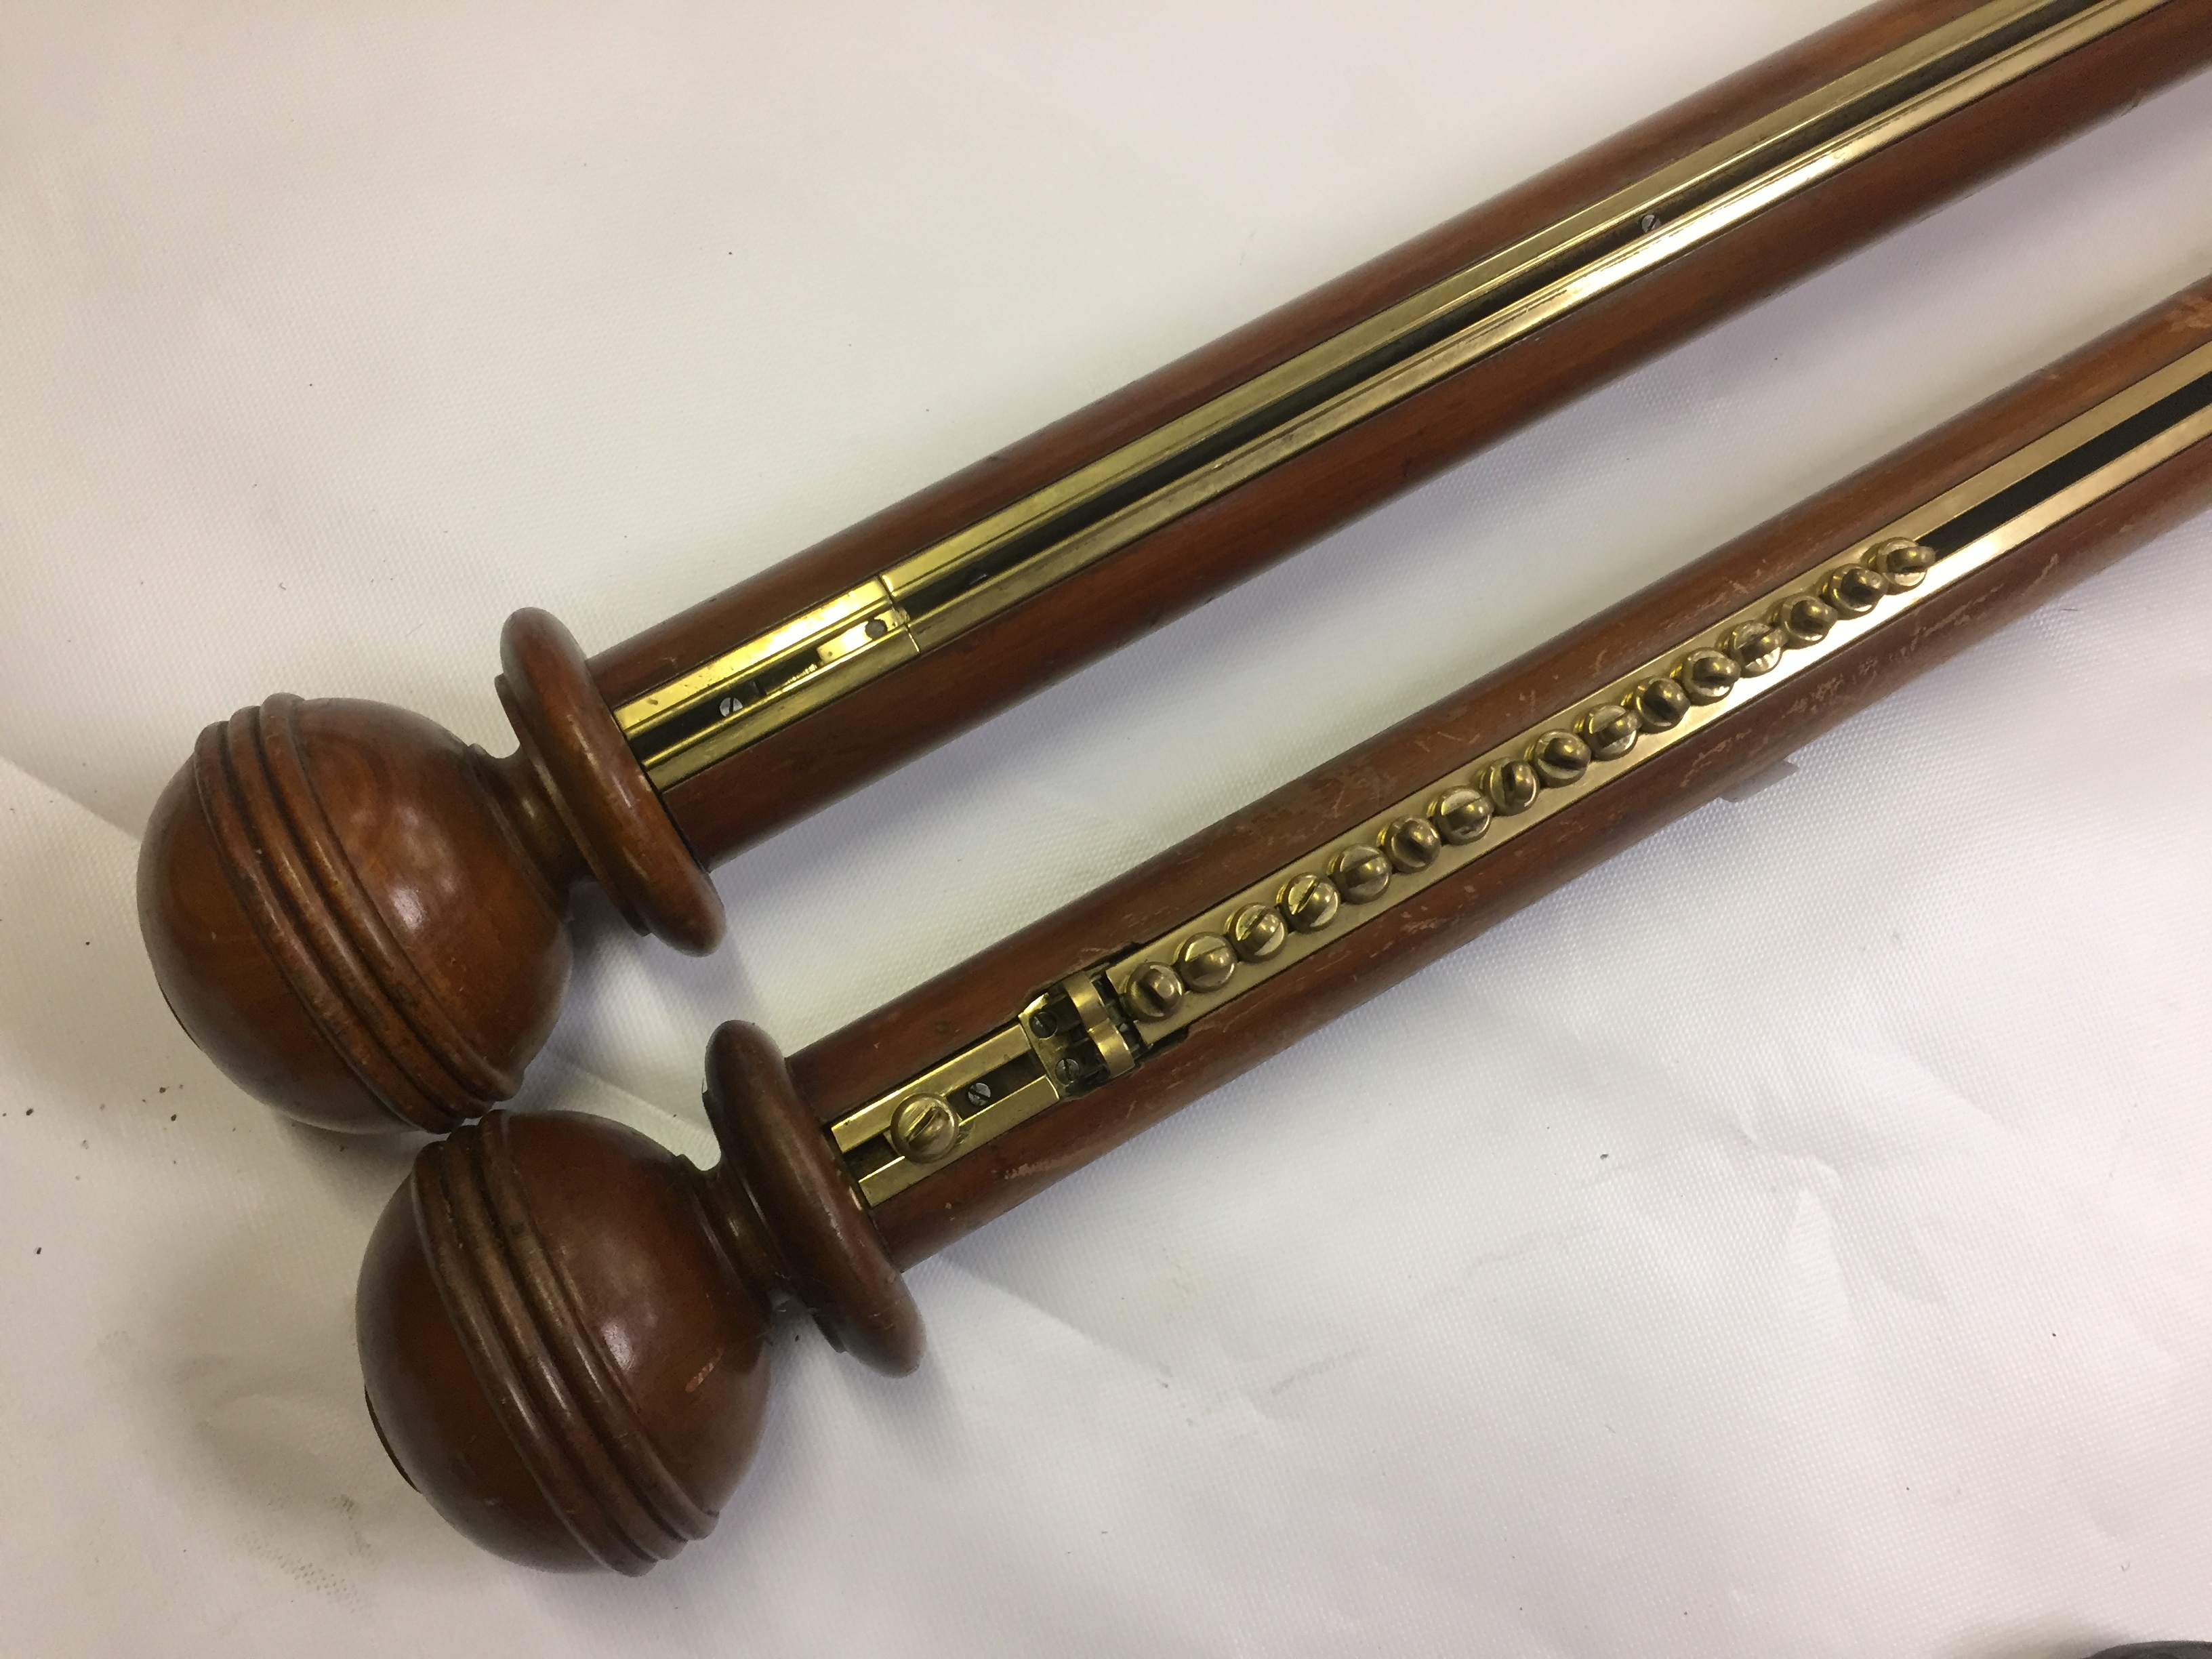 PAIR OF ANTIQUE WOODEN CURTAIN POLES WITH BRASS TRACKS - Image 3 of 3